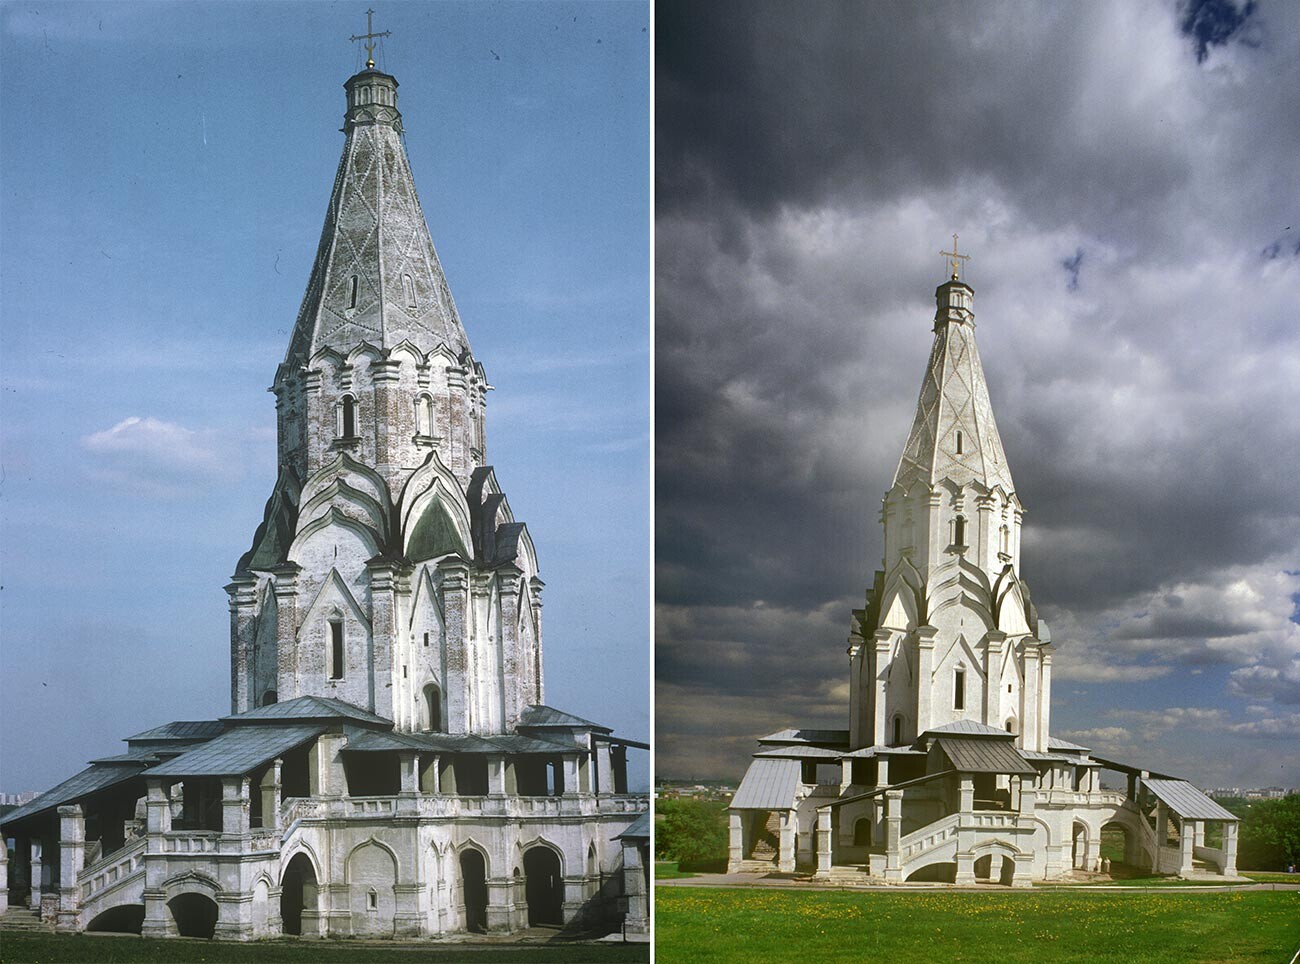 Left: Church of the Ascension. Southwest view with faded whitewash. May 13, 1995.
Right: West view with renovated whitewash. May 28, 1999